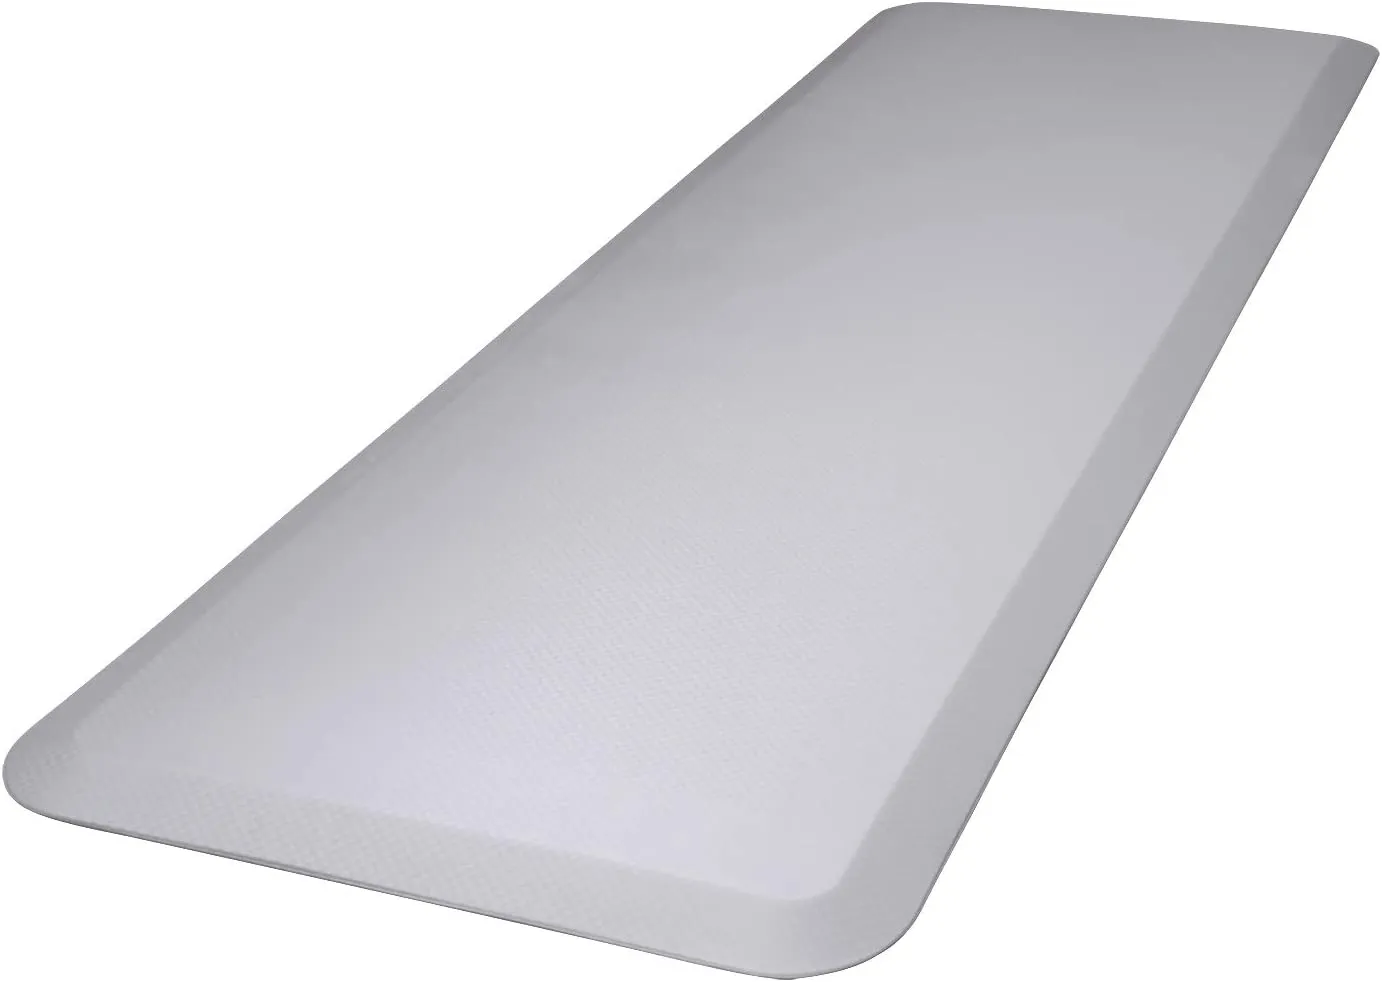 Hudson - From: 5620FLAT To: 5624FLAT - Pressure Eez Bedside Safety Mat Non Folding